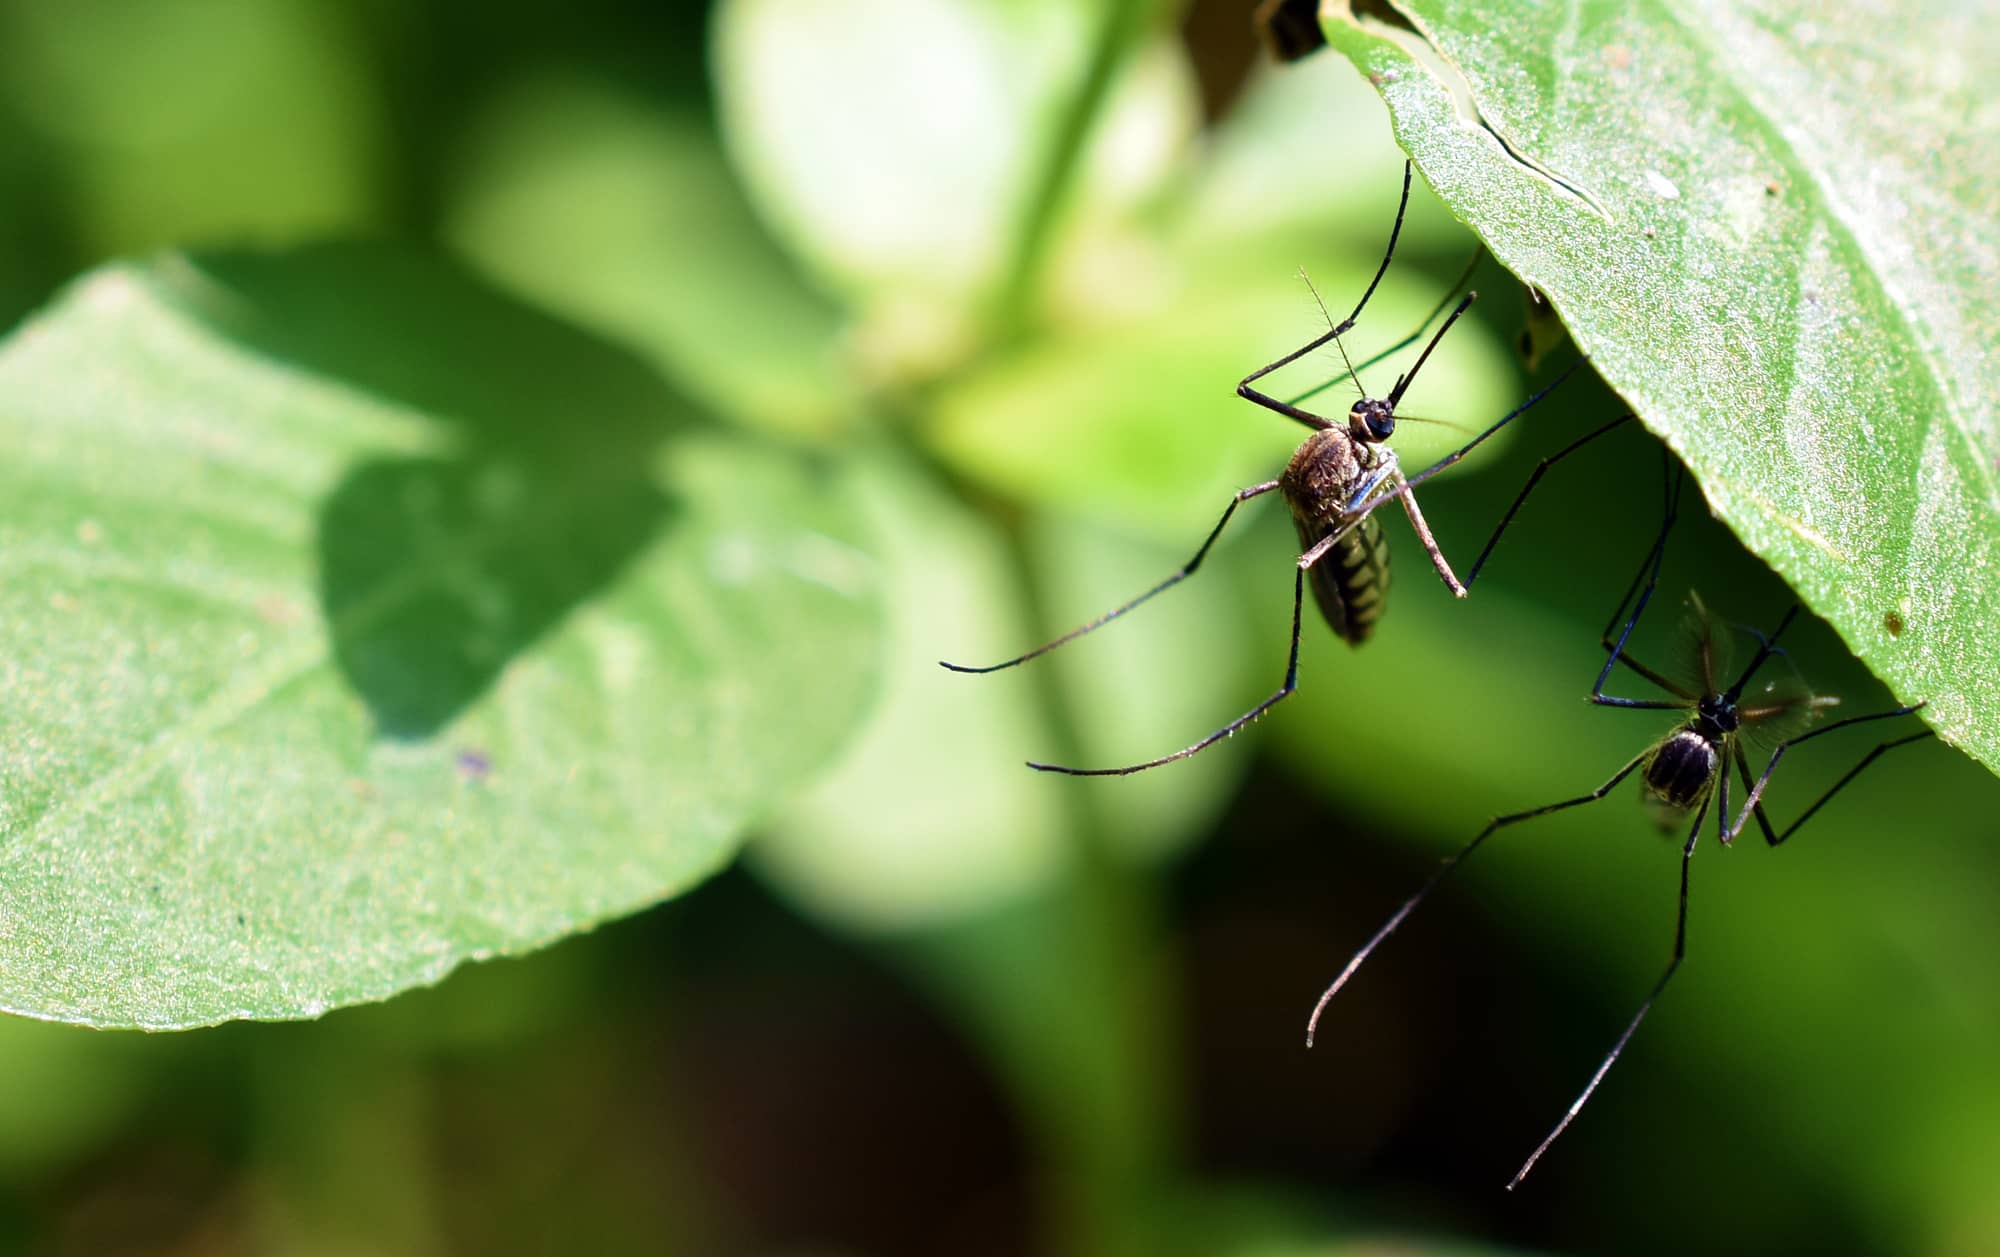 Female and male mosquitoes side by side natural on the leafs stock photo